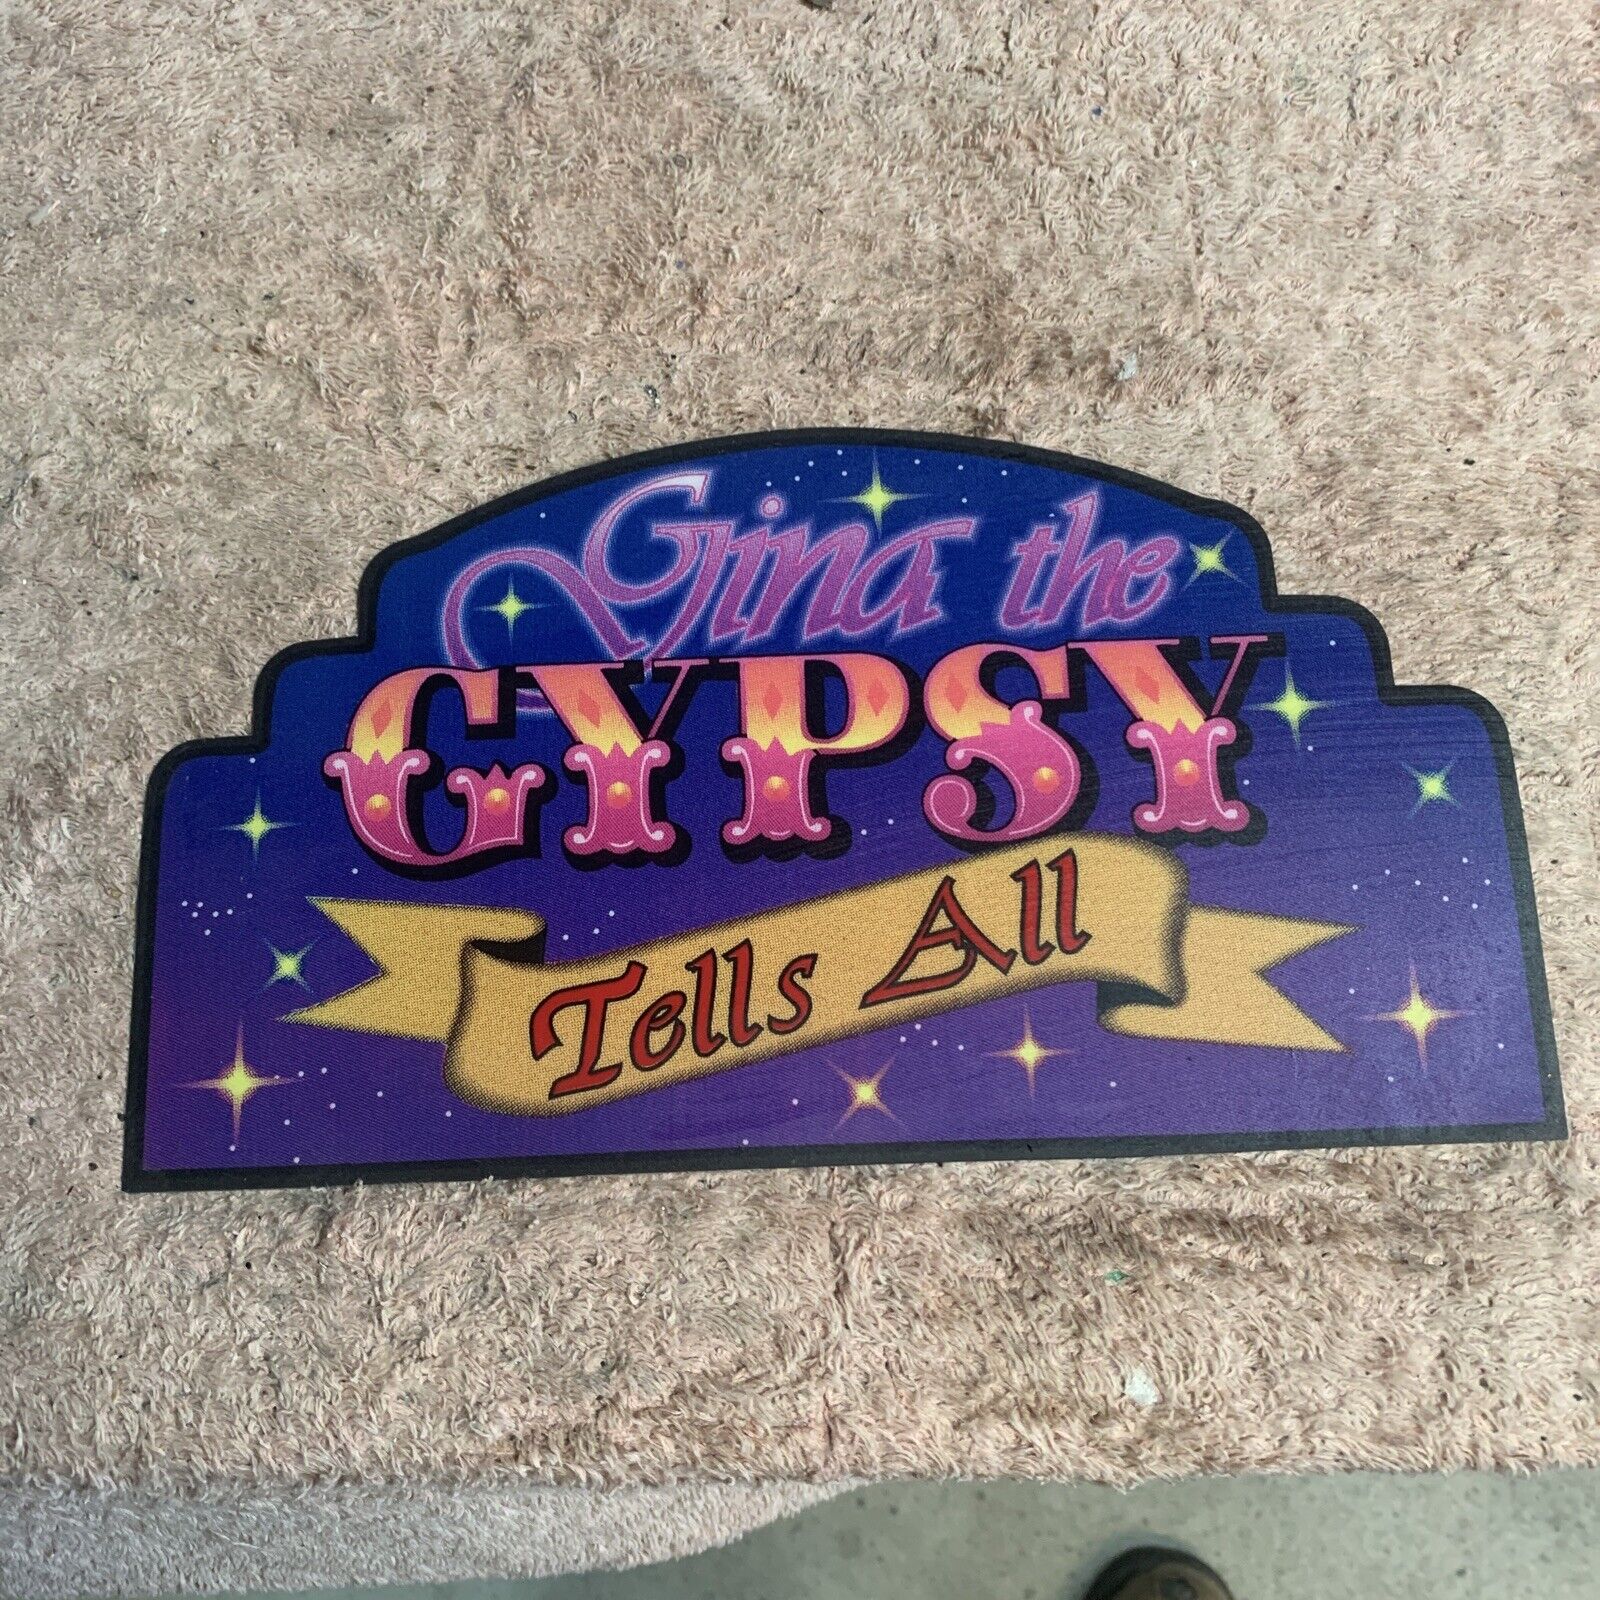 top  Decal For Impulse Industries Gina the gypsy